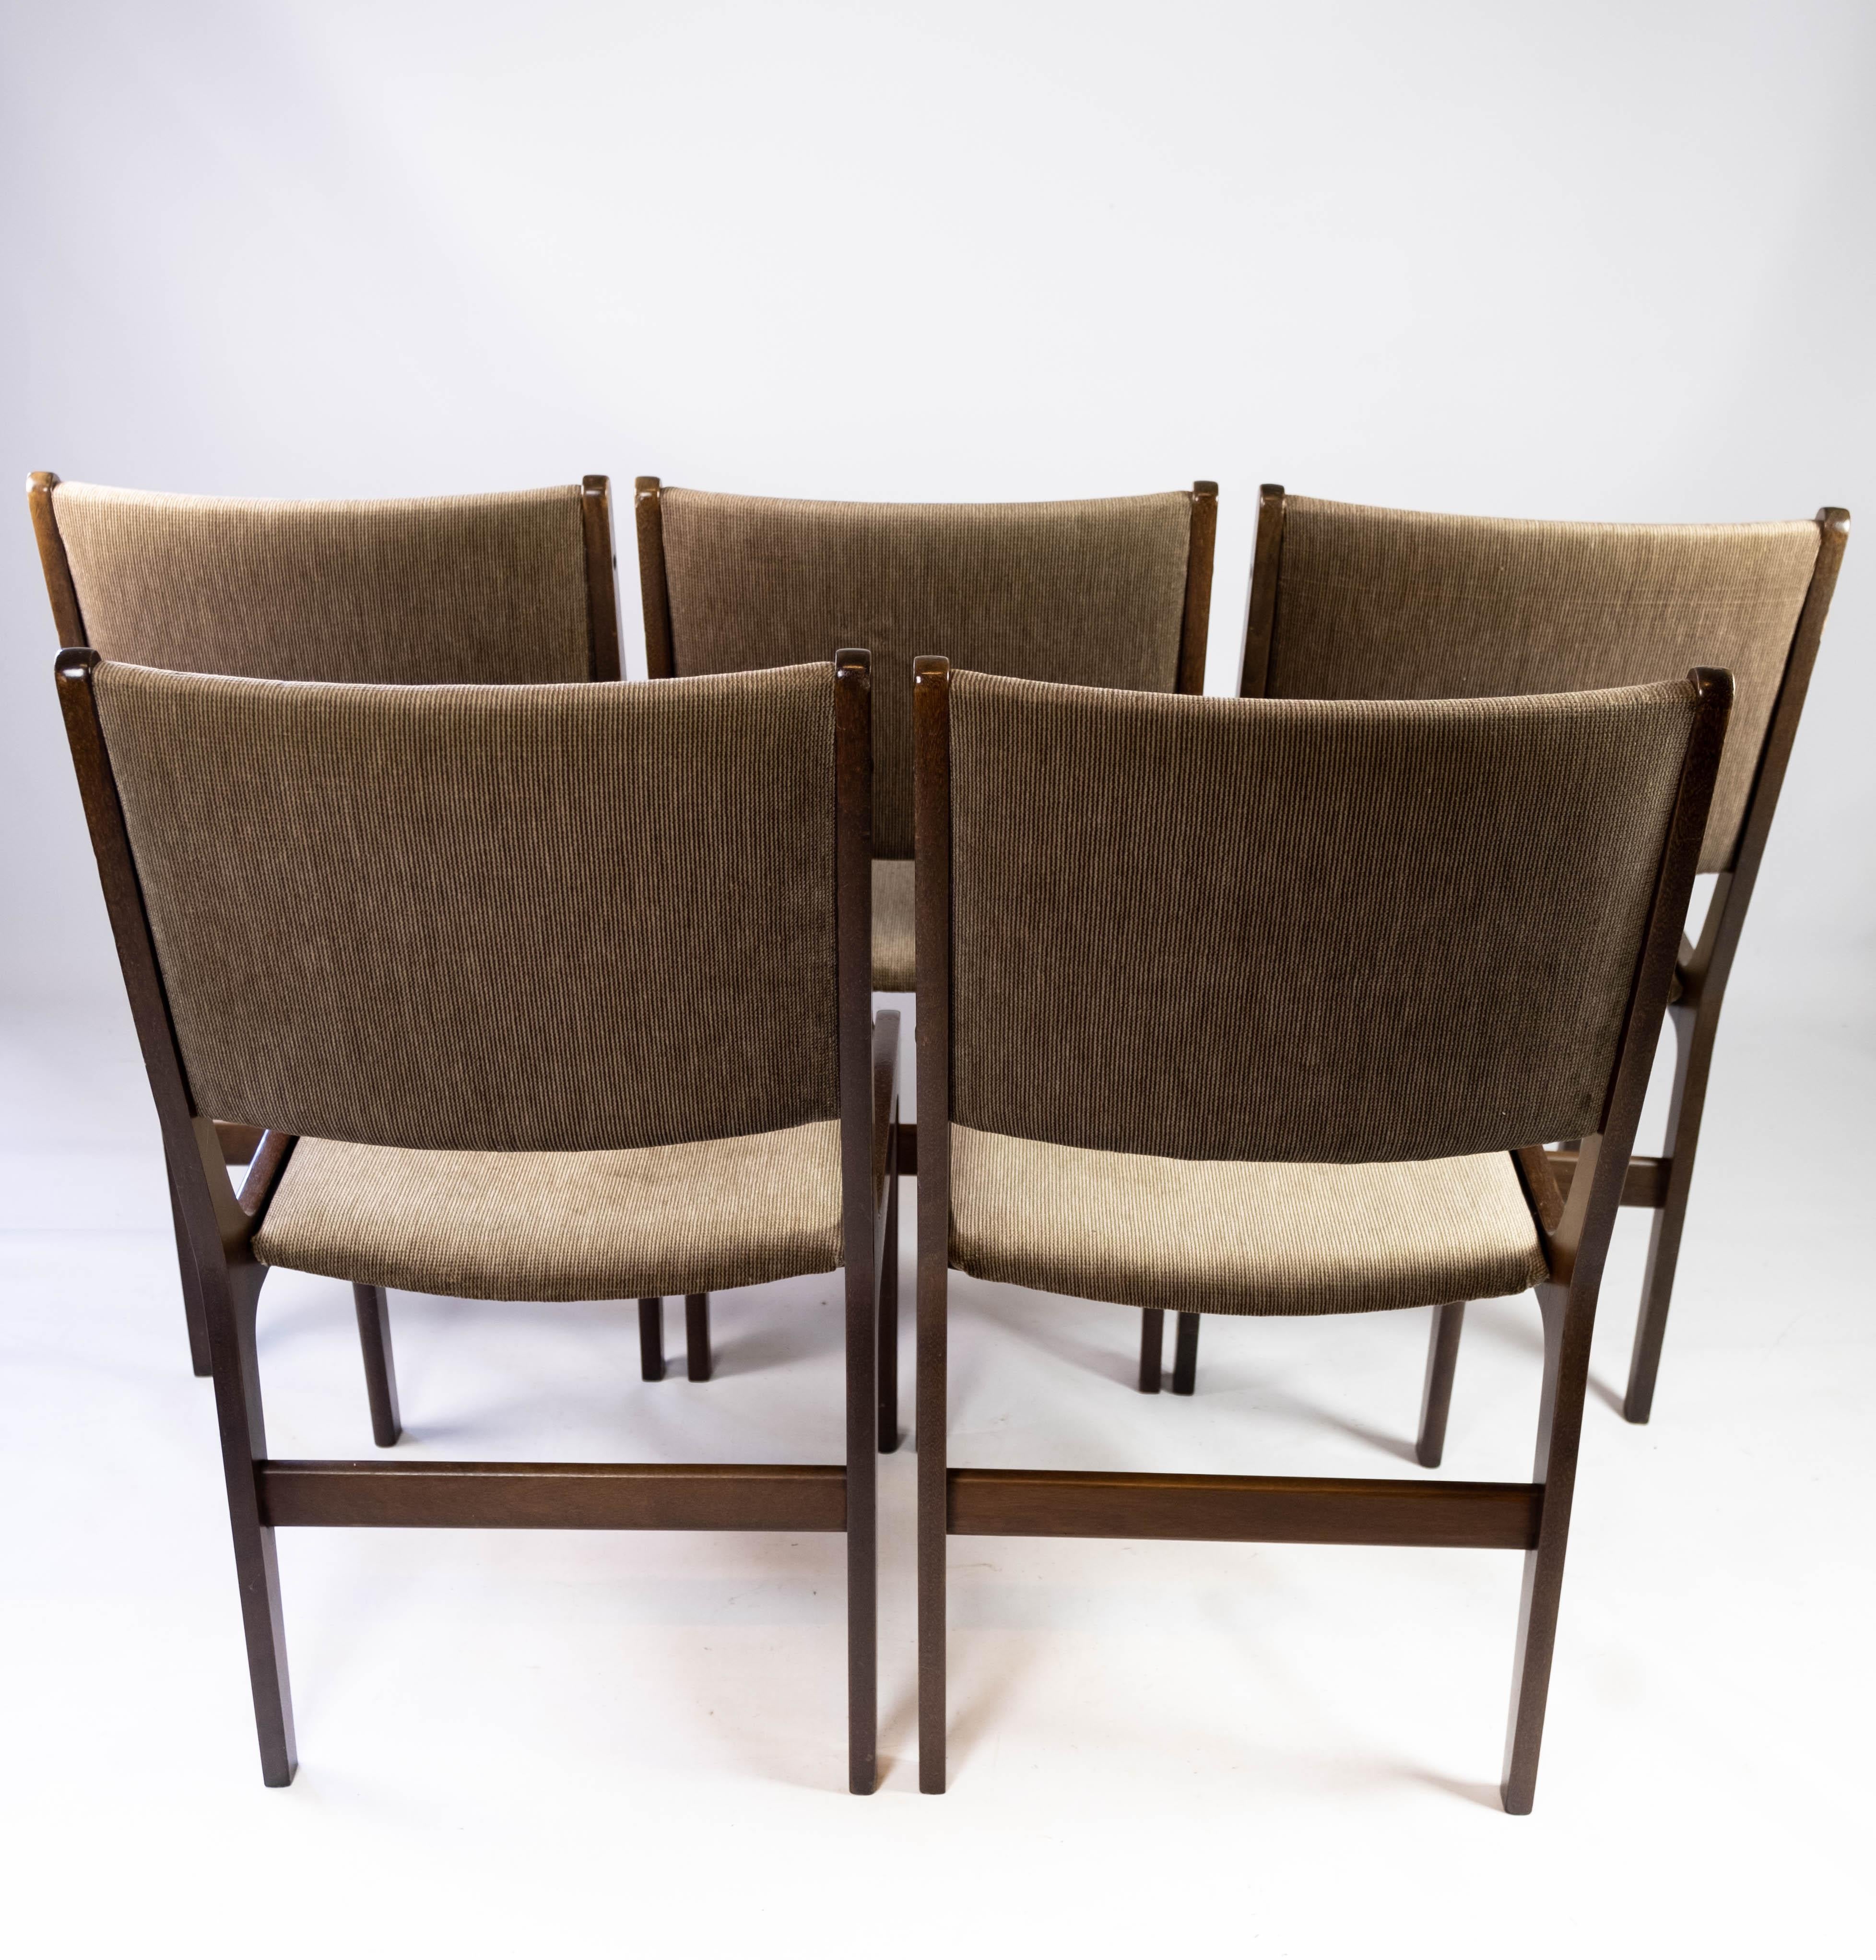 Mid-20th Century Set of Four Dining Room Chairs in Dark Wood of Danish Design by Faarstrup, 1960s For Sale